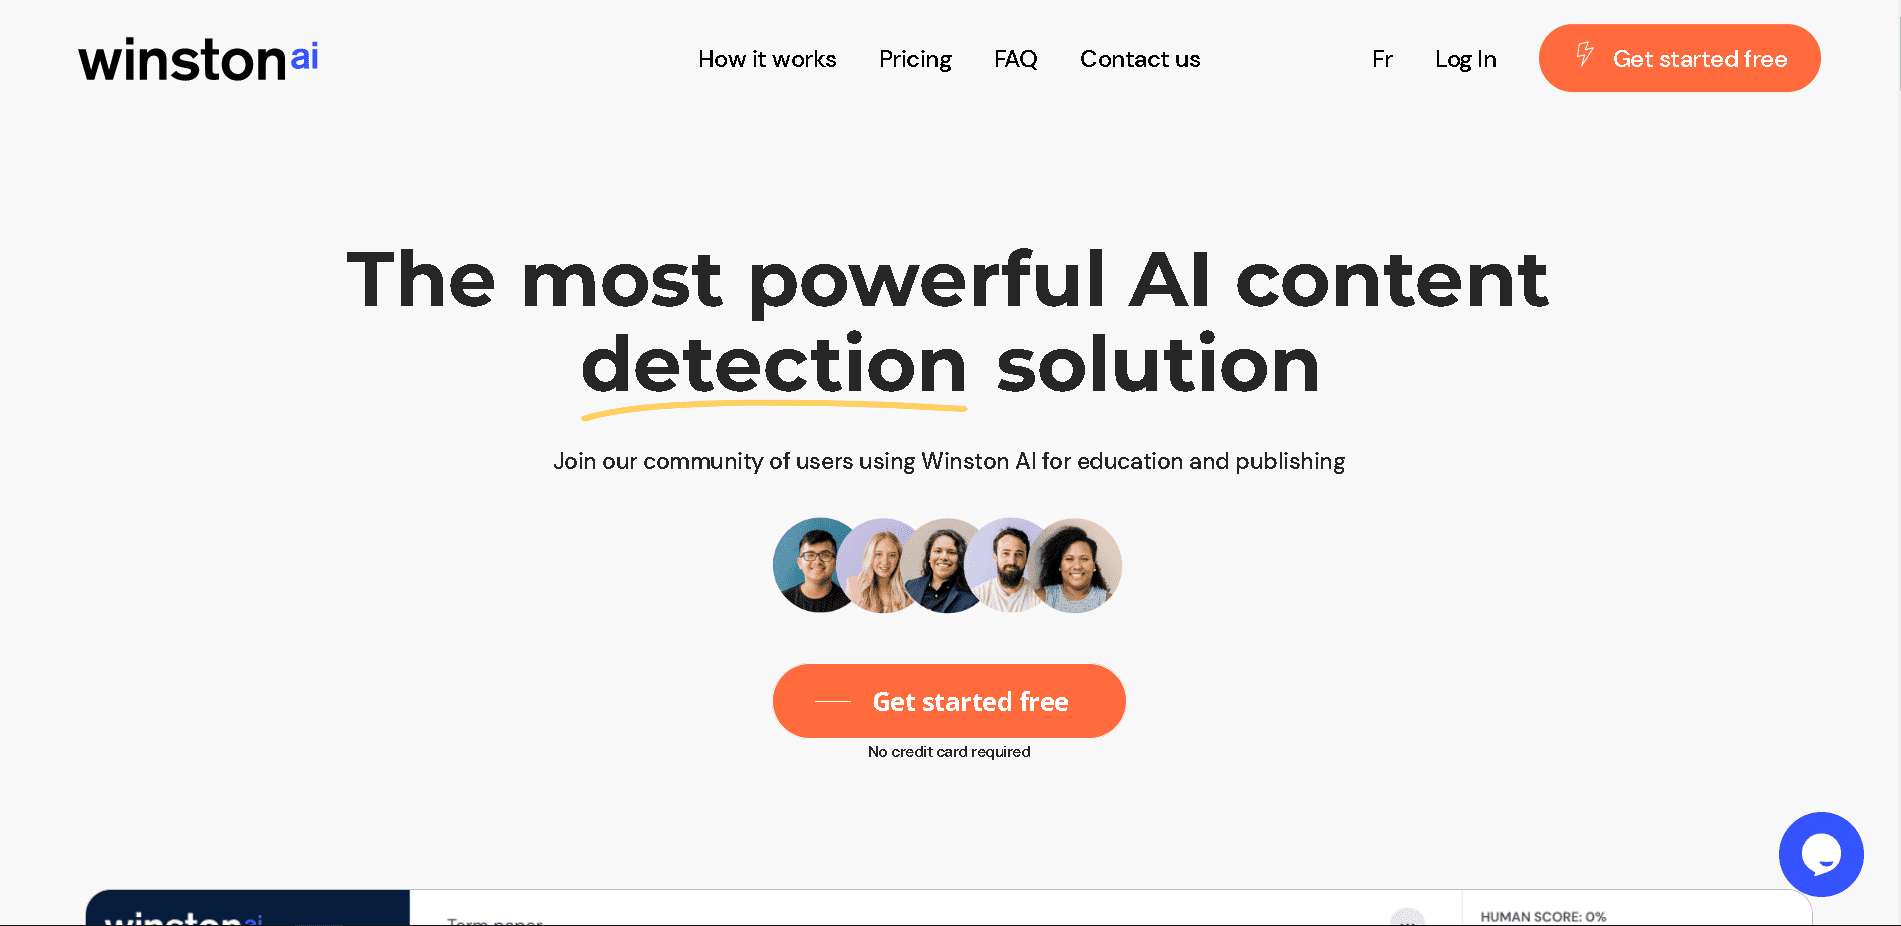 Winston AI premium AI content detection tool and software